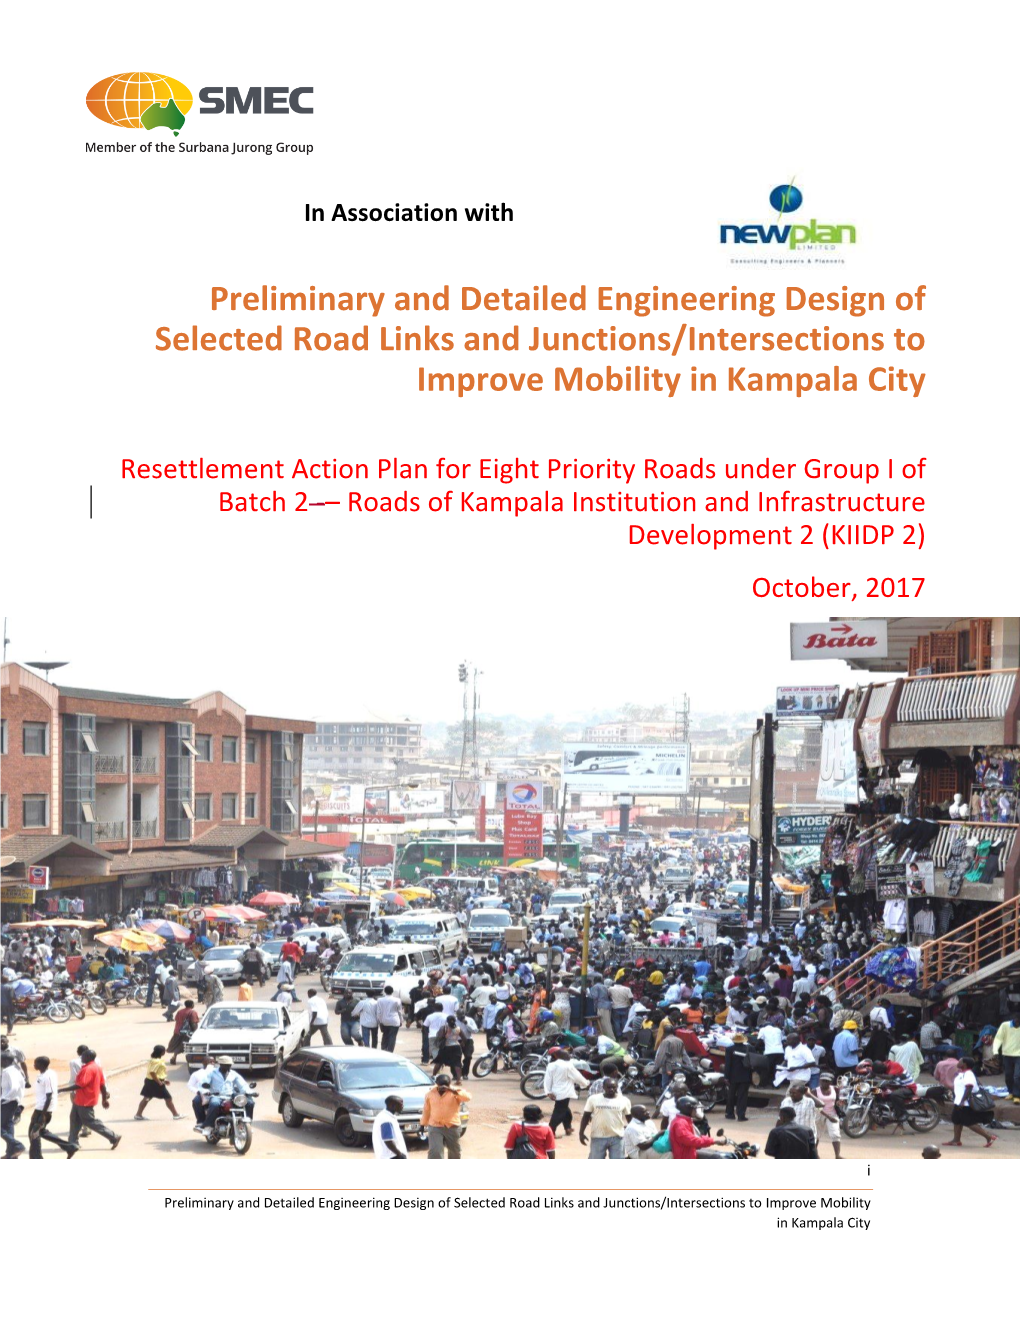 Preliminary and Detailed Engineering Design of Selected Road Links and Junctions/Intersections to Improve Mobility in Kampala City